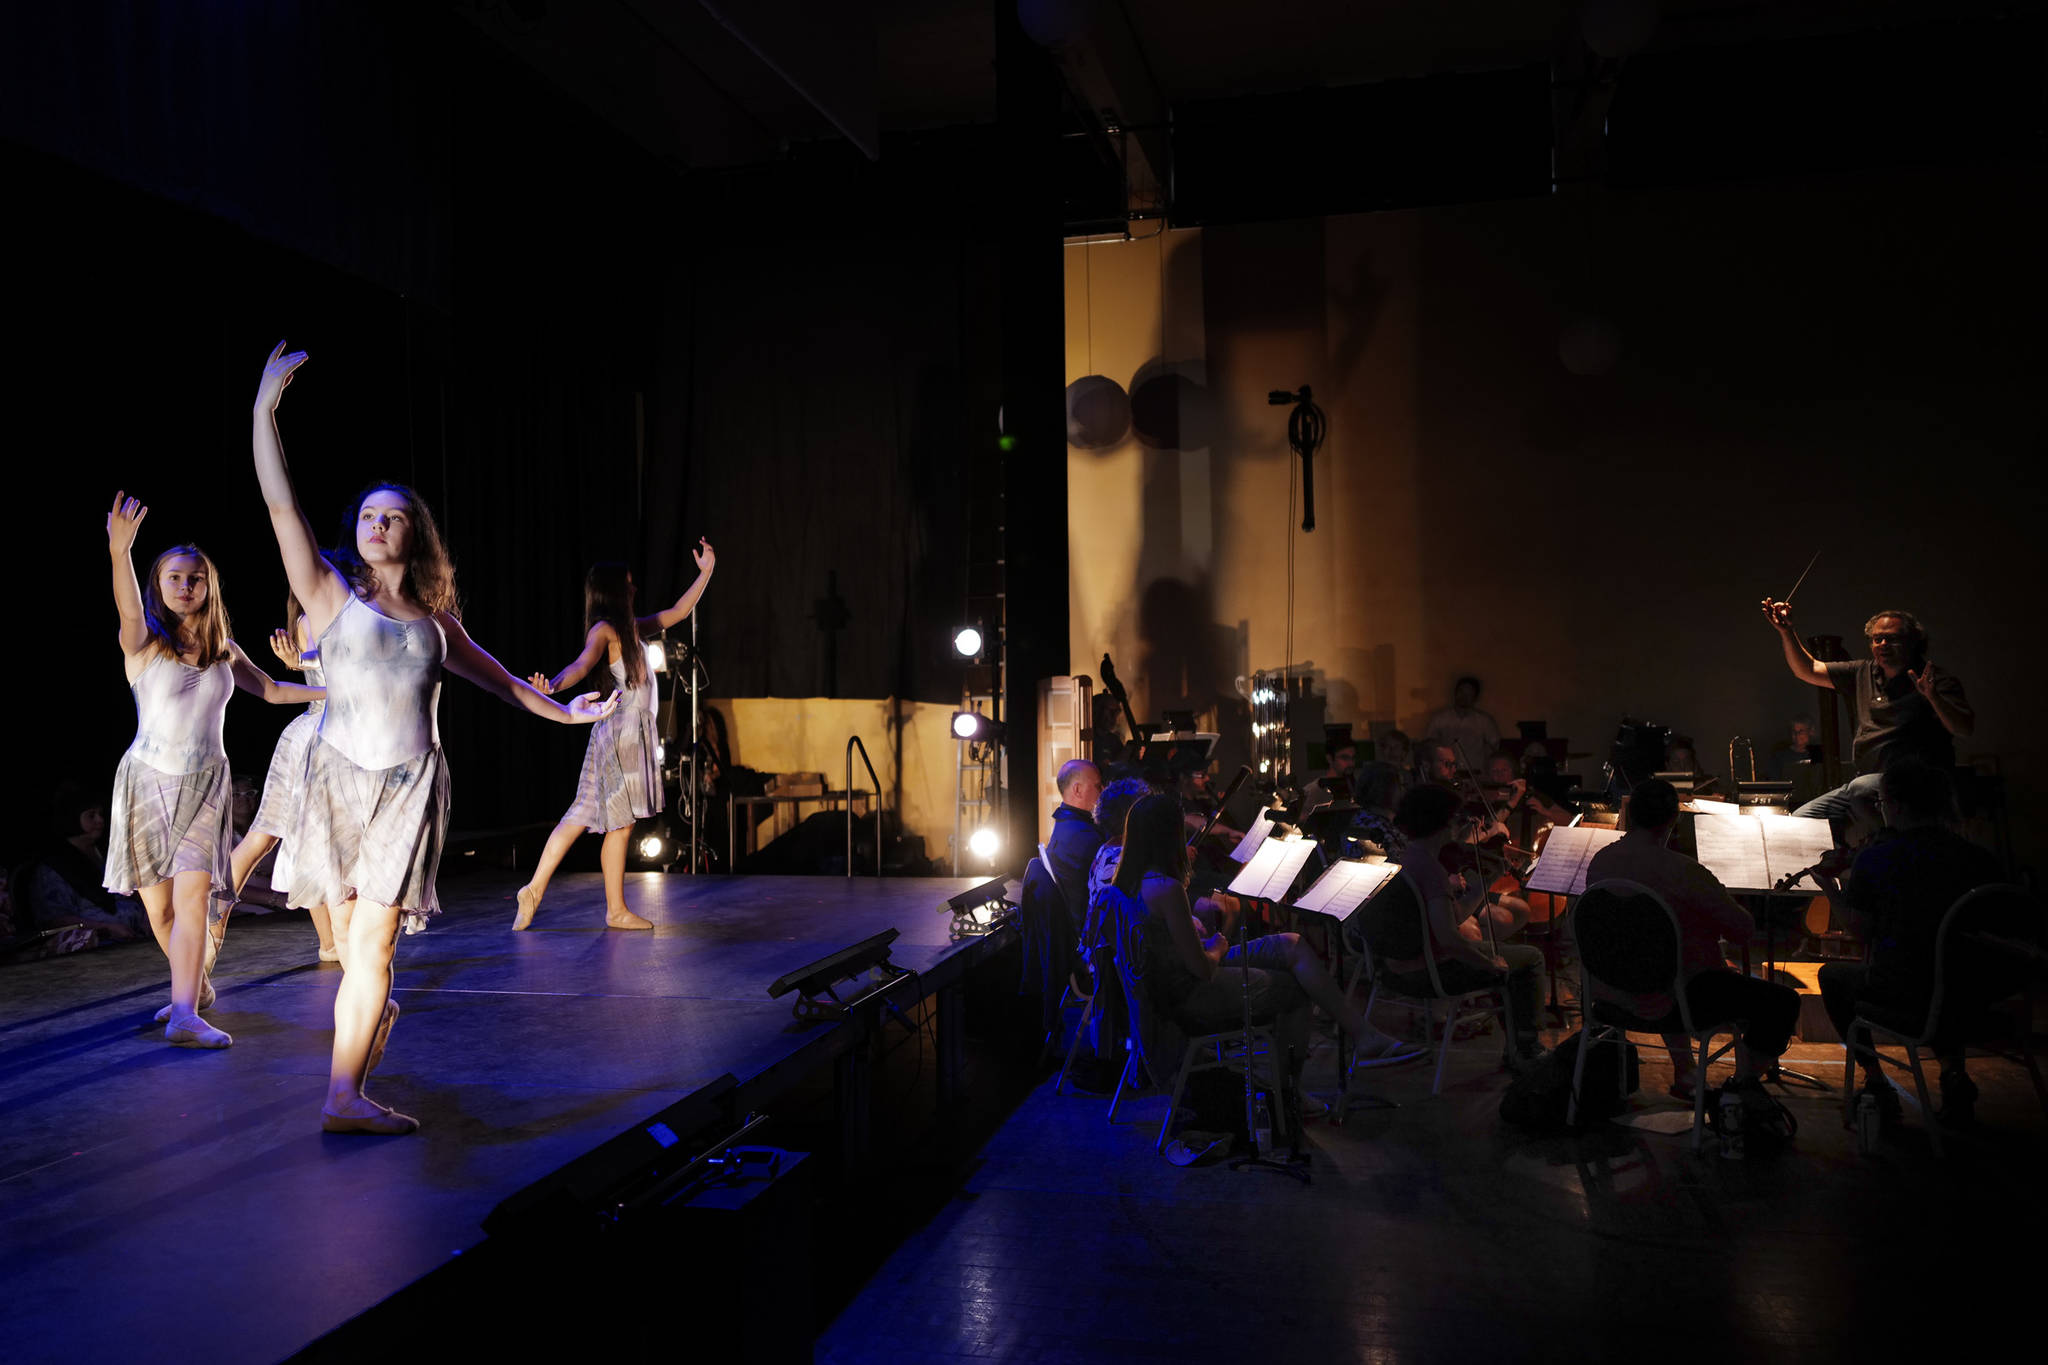 Dancers take to the stage as the Juneau Lyric Opera rehearses Composer Pietro Mascagni’s Cavalleria Rusticana at the Juneau Arts and Culture Center on Monday, Aug. 12, 2019. (Michael Penn | Juneau Empire)